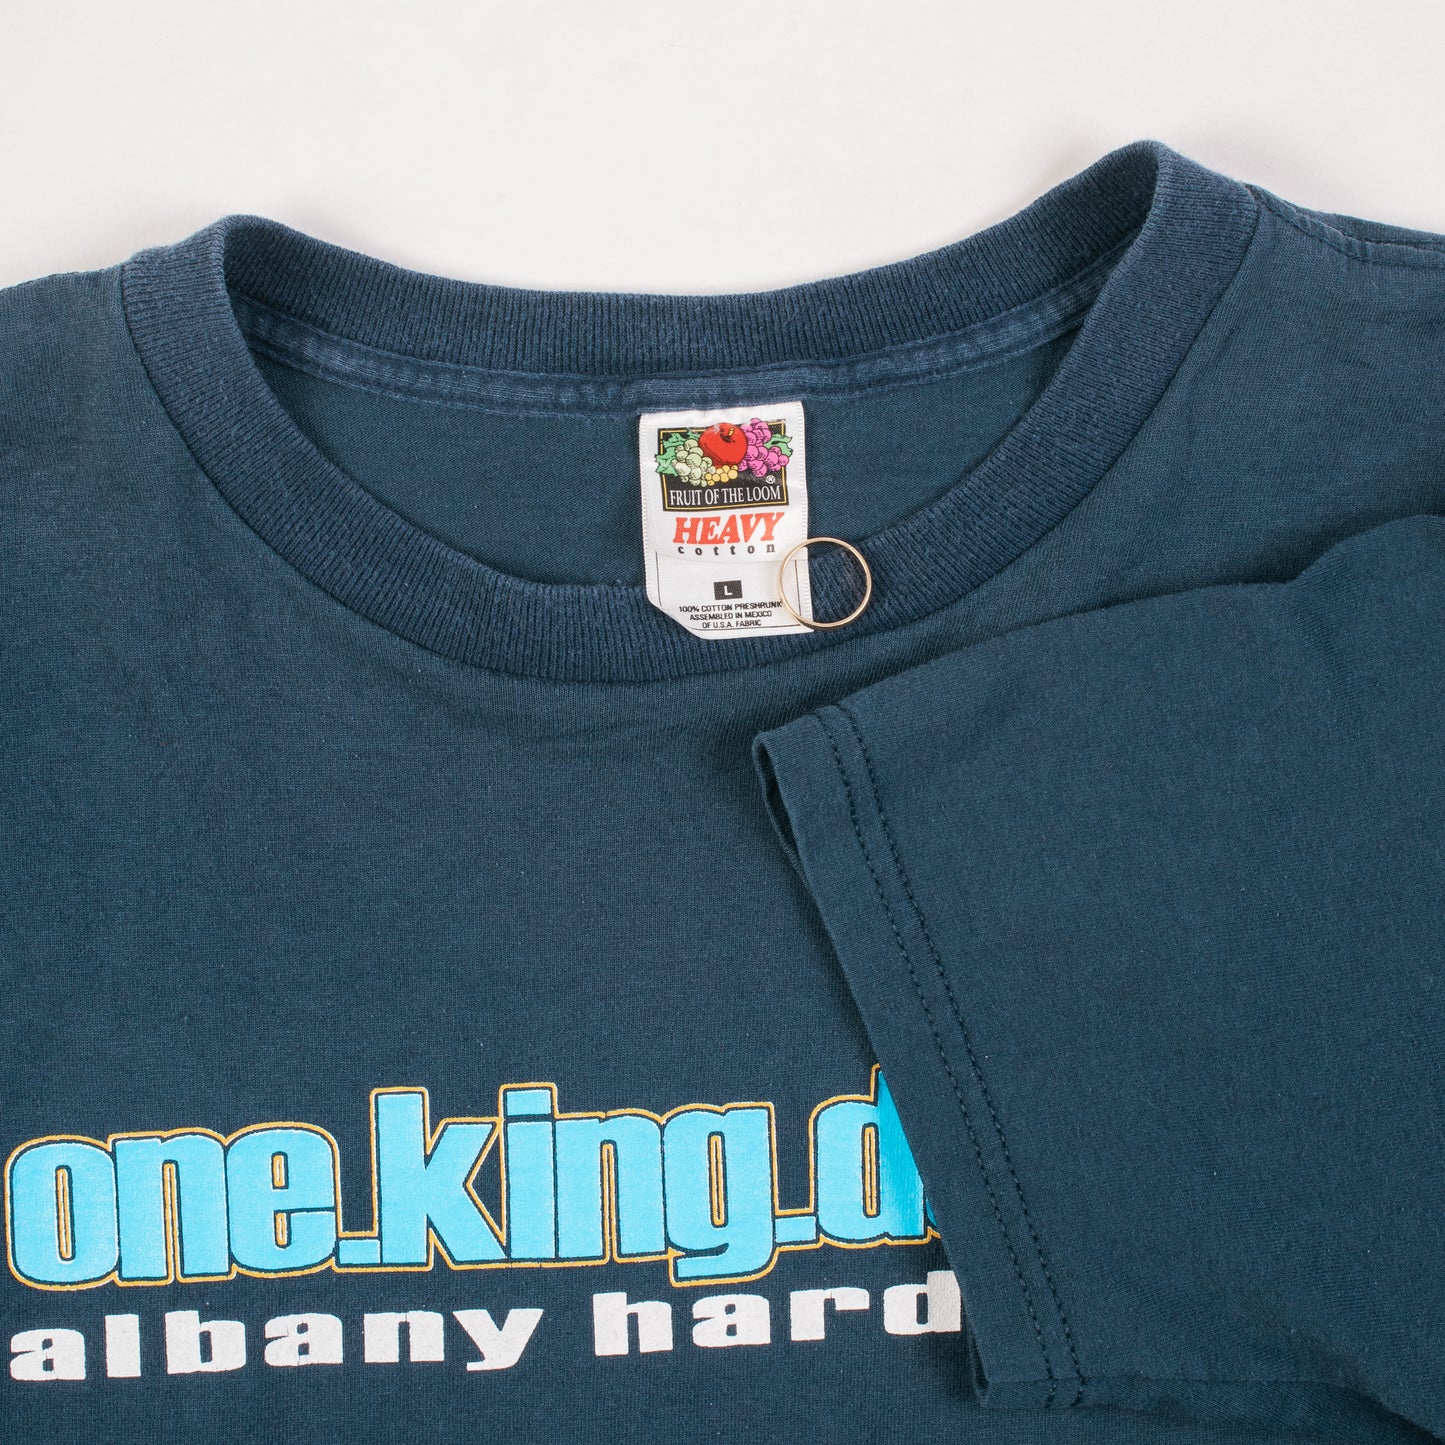 Vintage 90’s One King Down T-Shirt